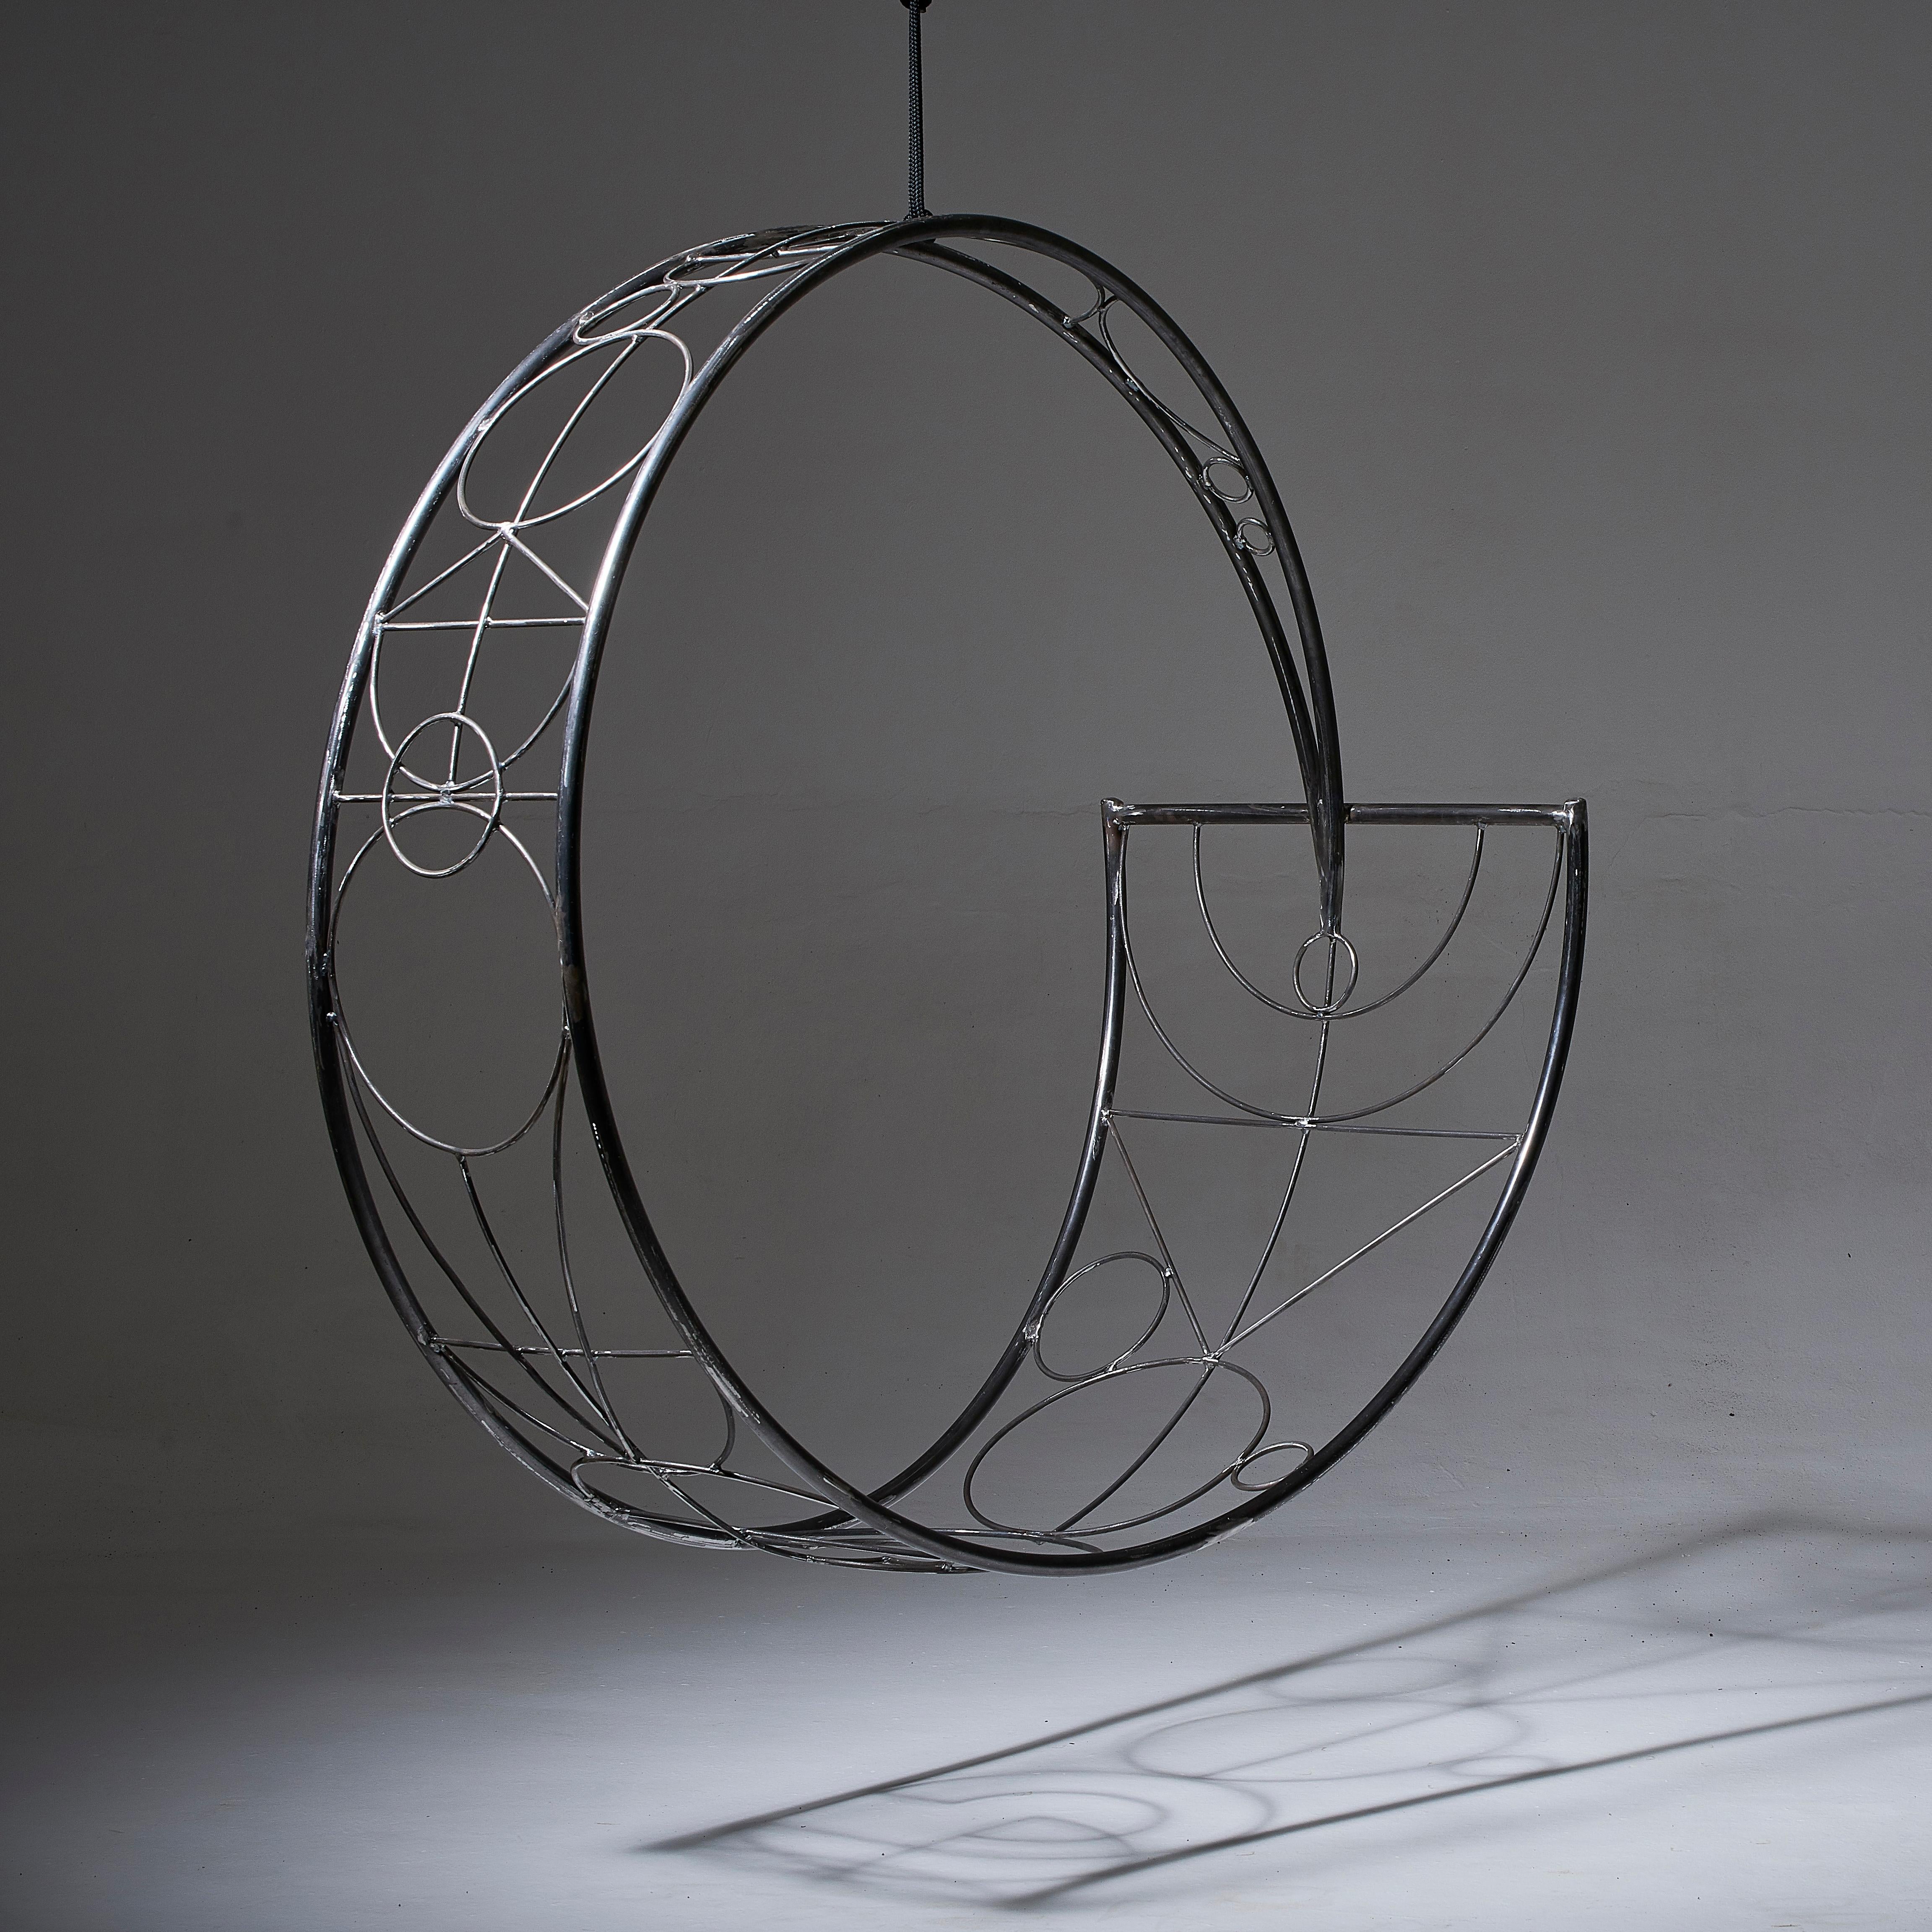 The WHEEL swing seat is sculptural and dynamic. Its striking circular shape lends itself for use as a functional art piece.
The chair has an open yet enveloping feel. 
The pattern detail is inspired by nature and reminiscent of the veins in